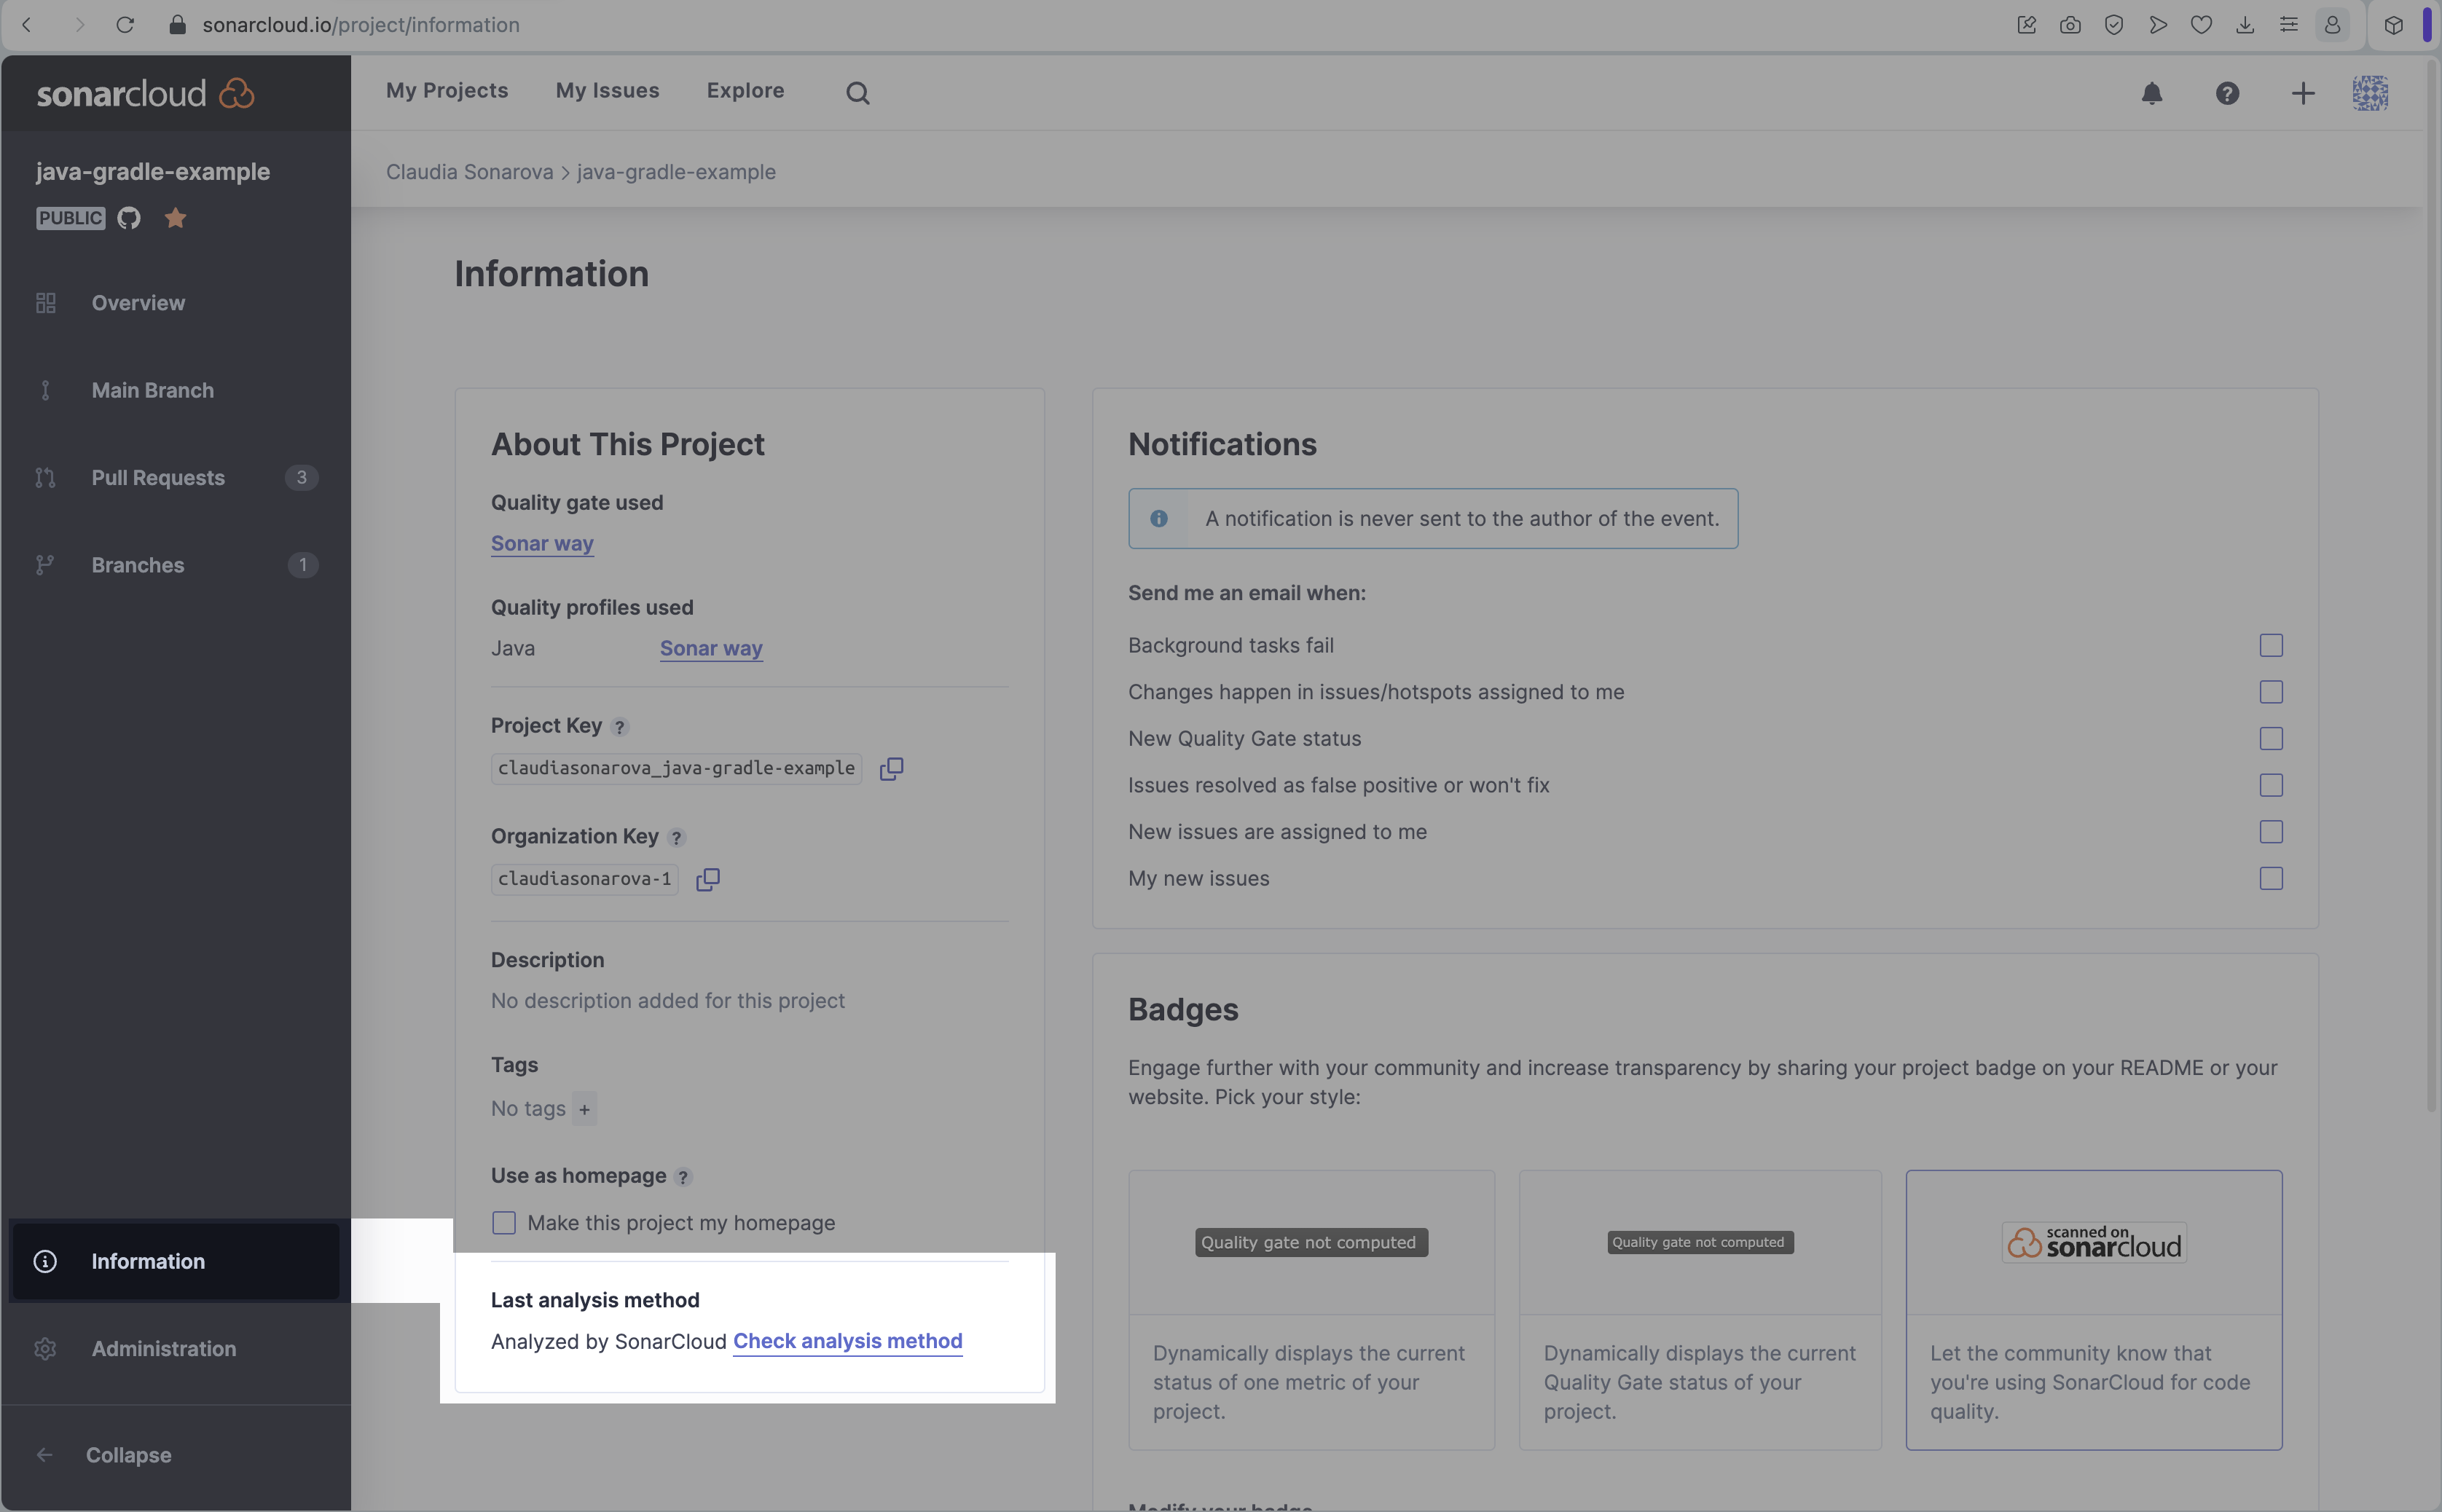 Go to SonarCloud's Information page to see your Last analysis method.